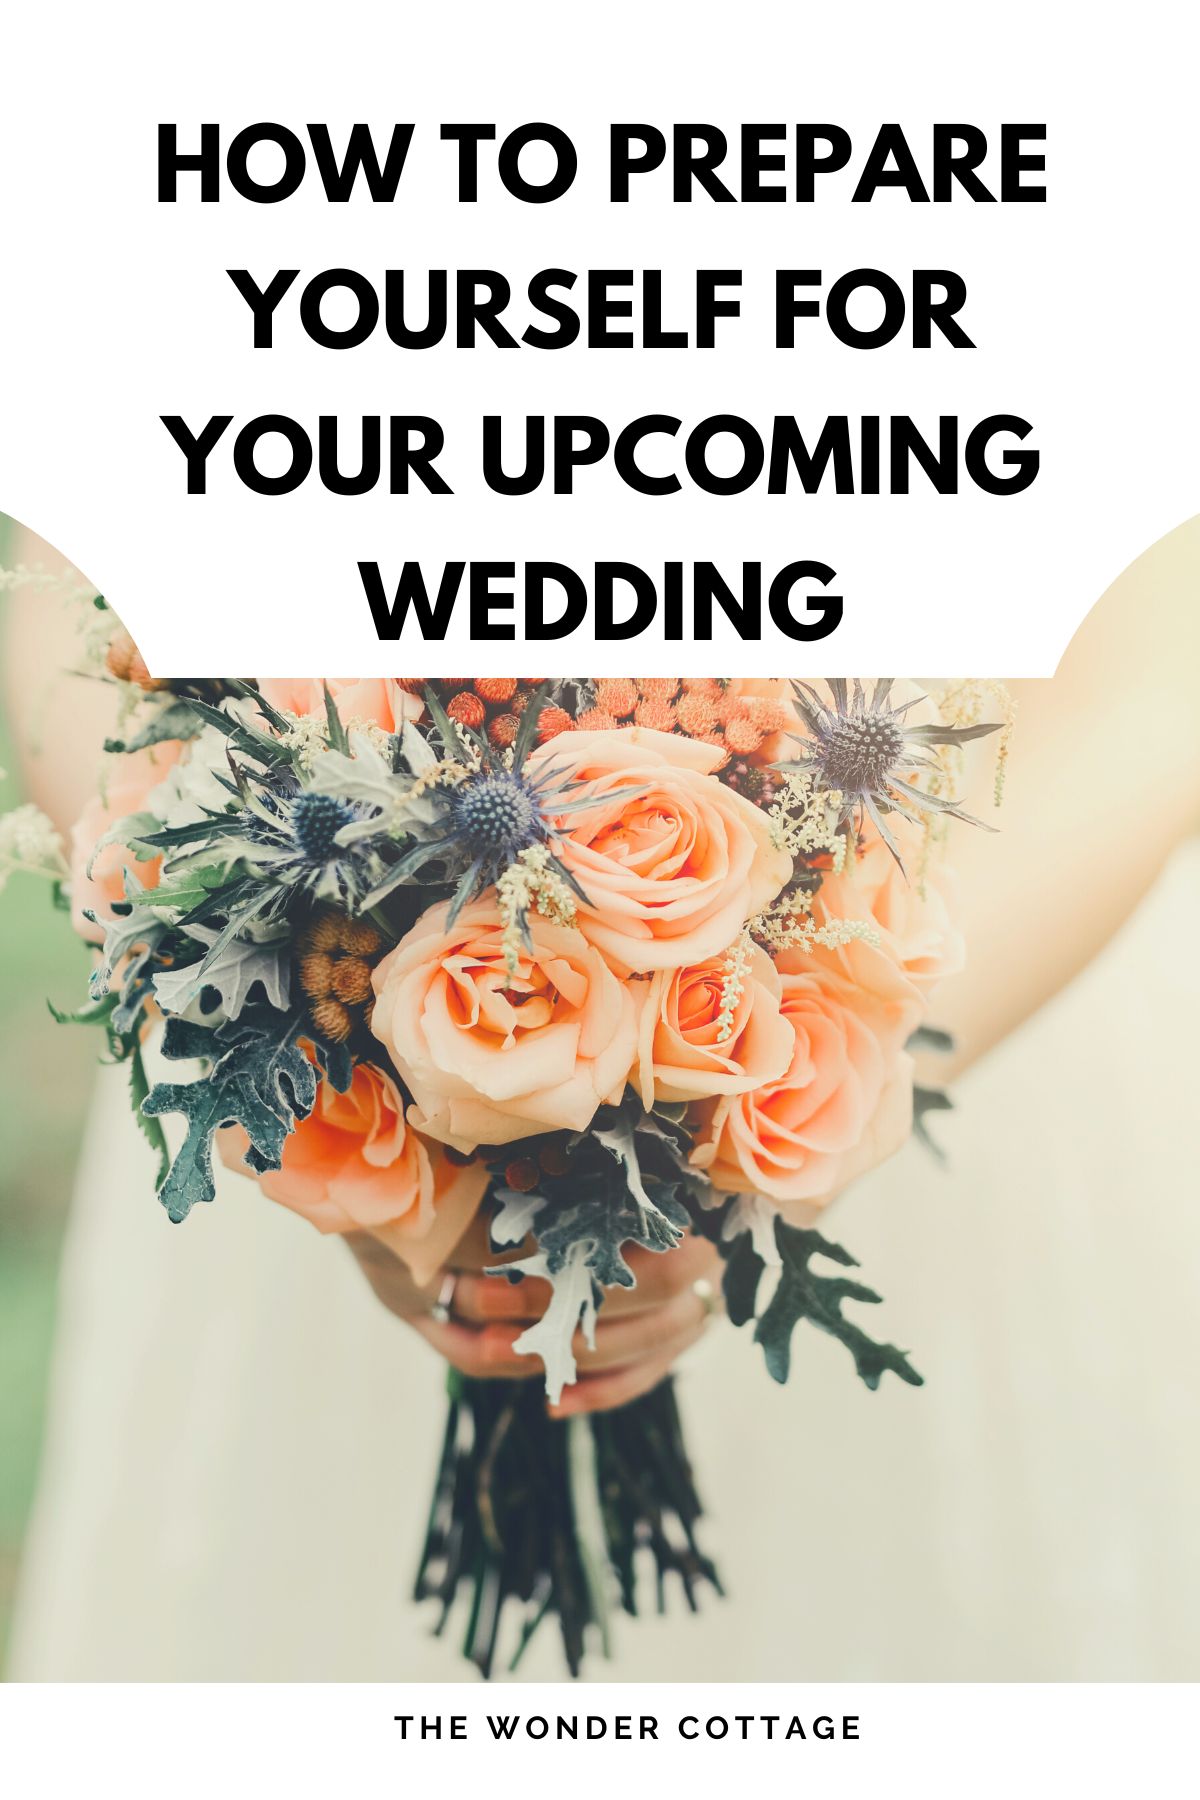 How To Prepare Yourself For Your Upcoming Wedding